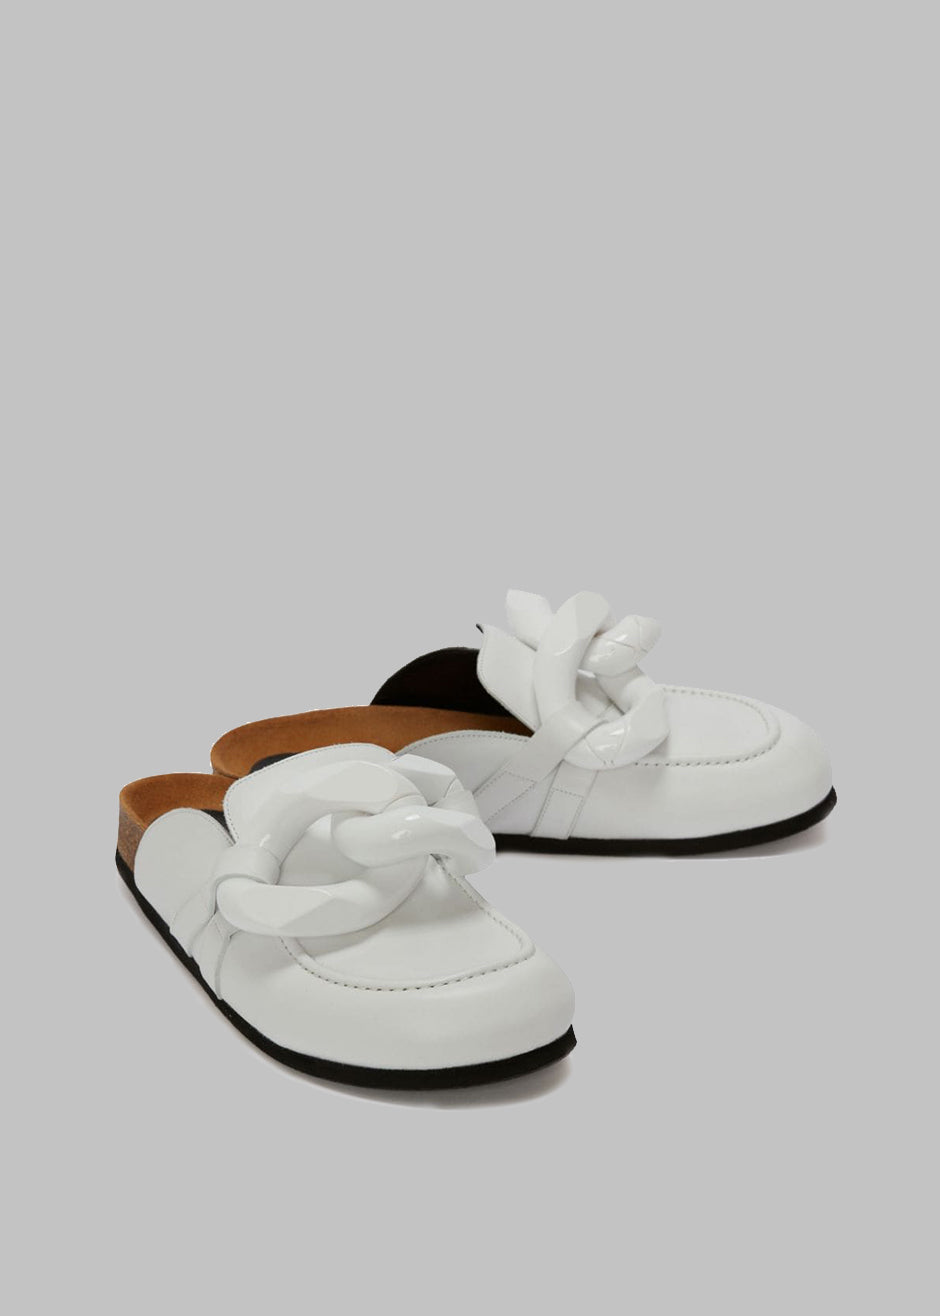 JW Anderson Chain Loafer Mules - White